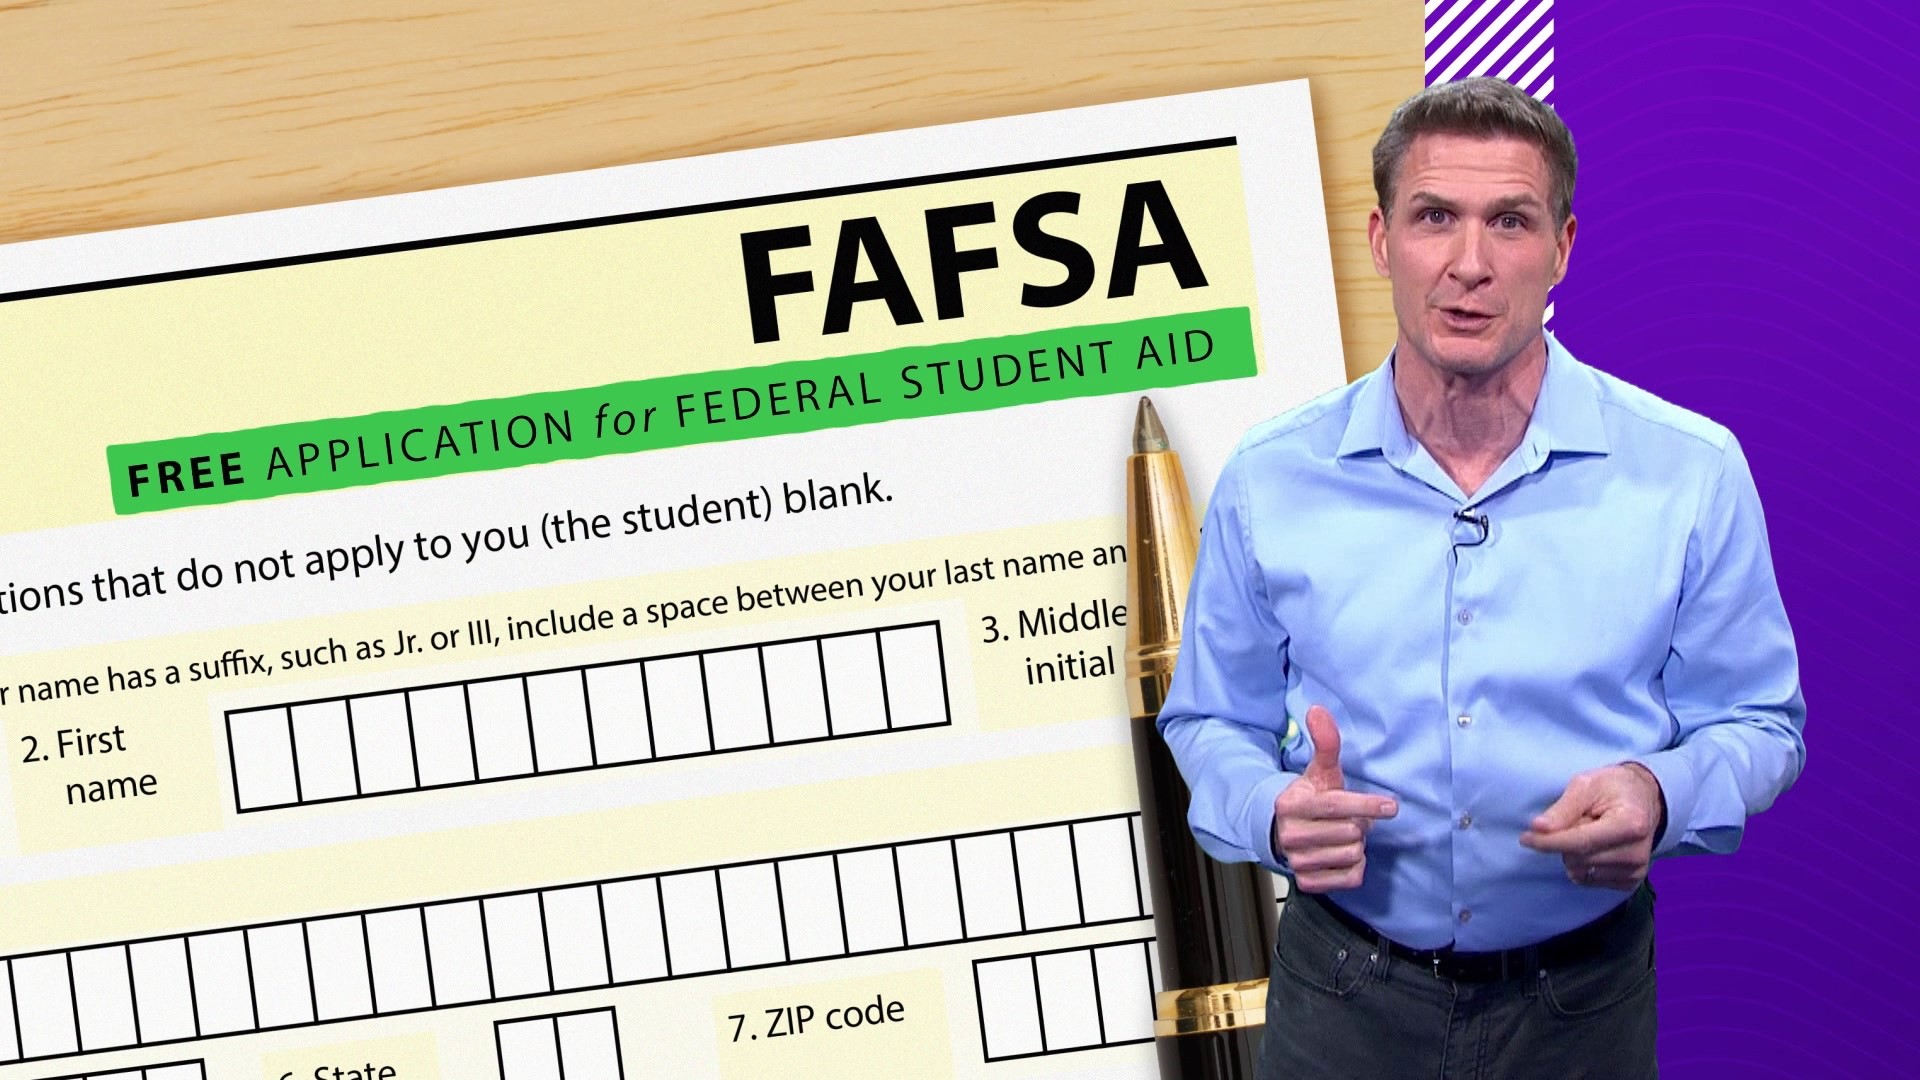 The new FAFSA form is almost out...and will come with big changes.